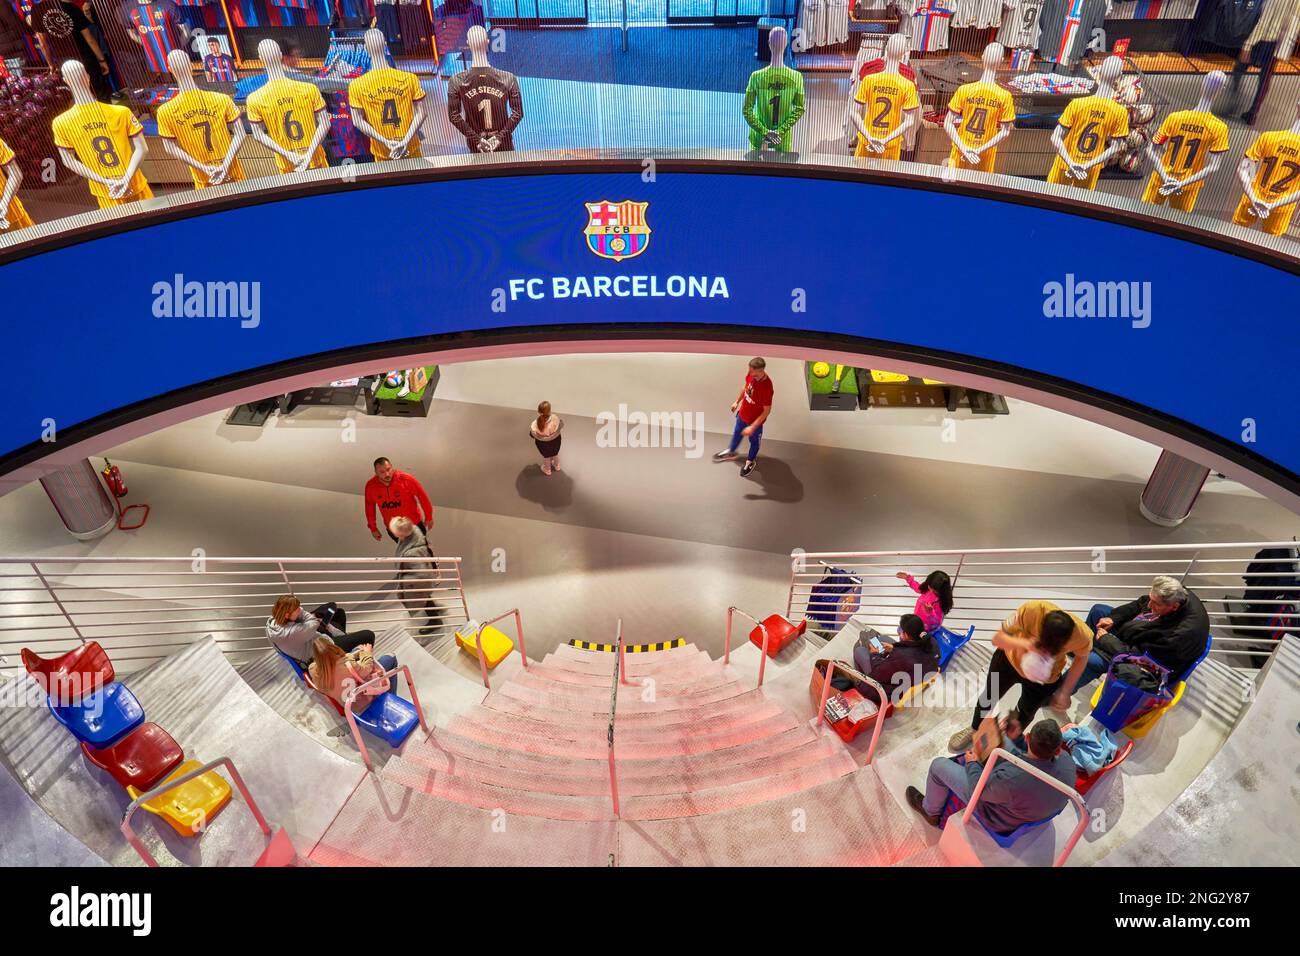 Visiting the official store at Camp Nou arena - the official playground of FC Barcelona Stock Photo